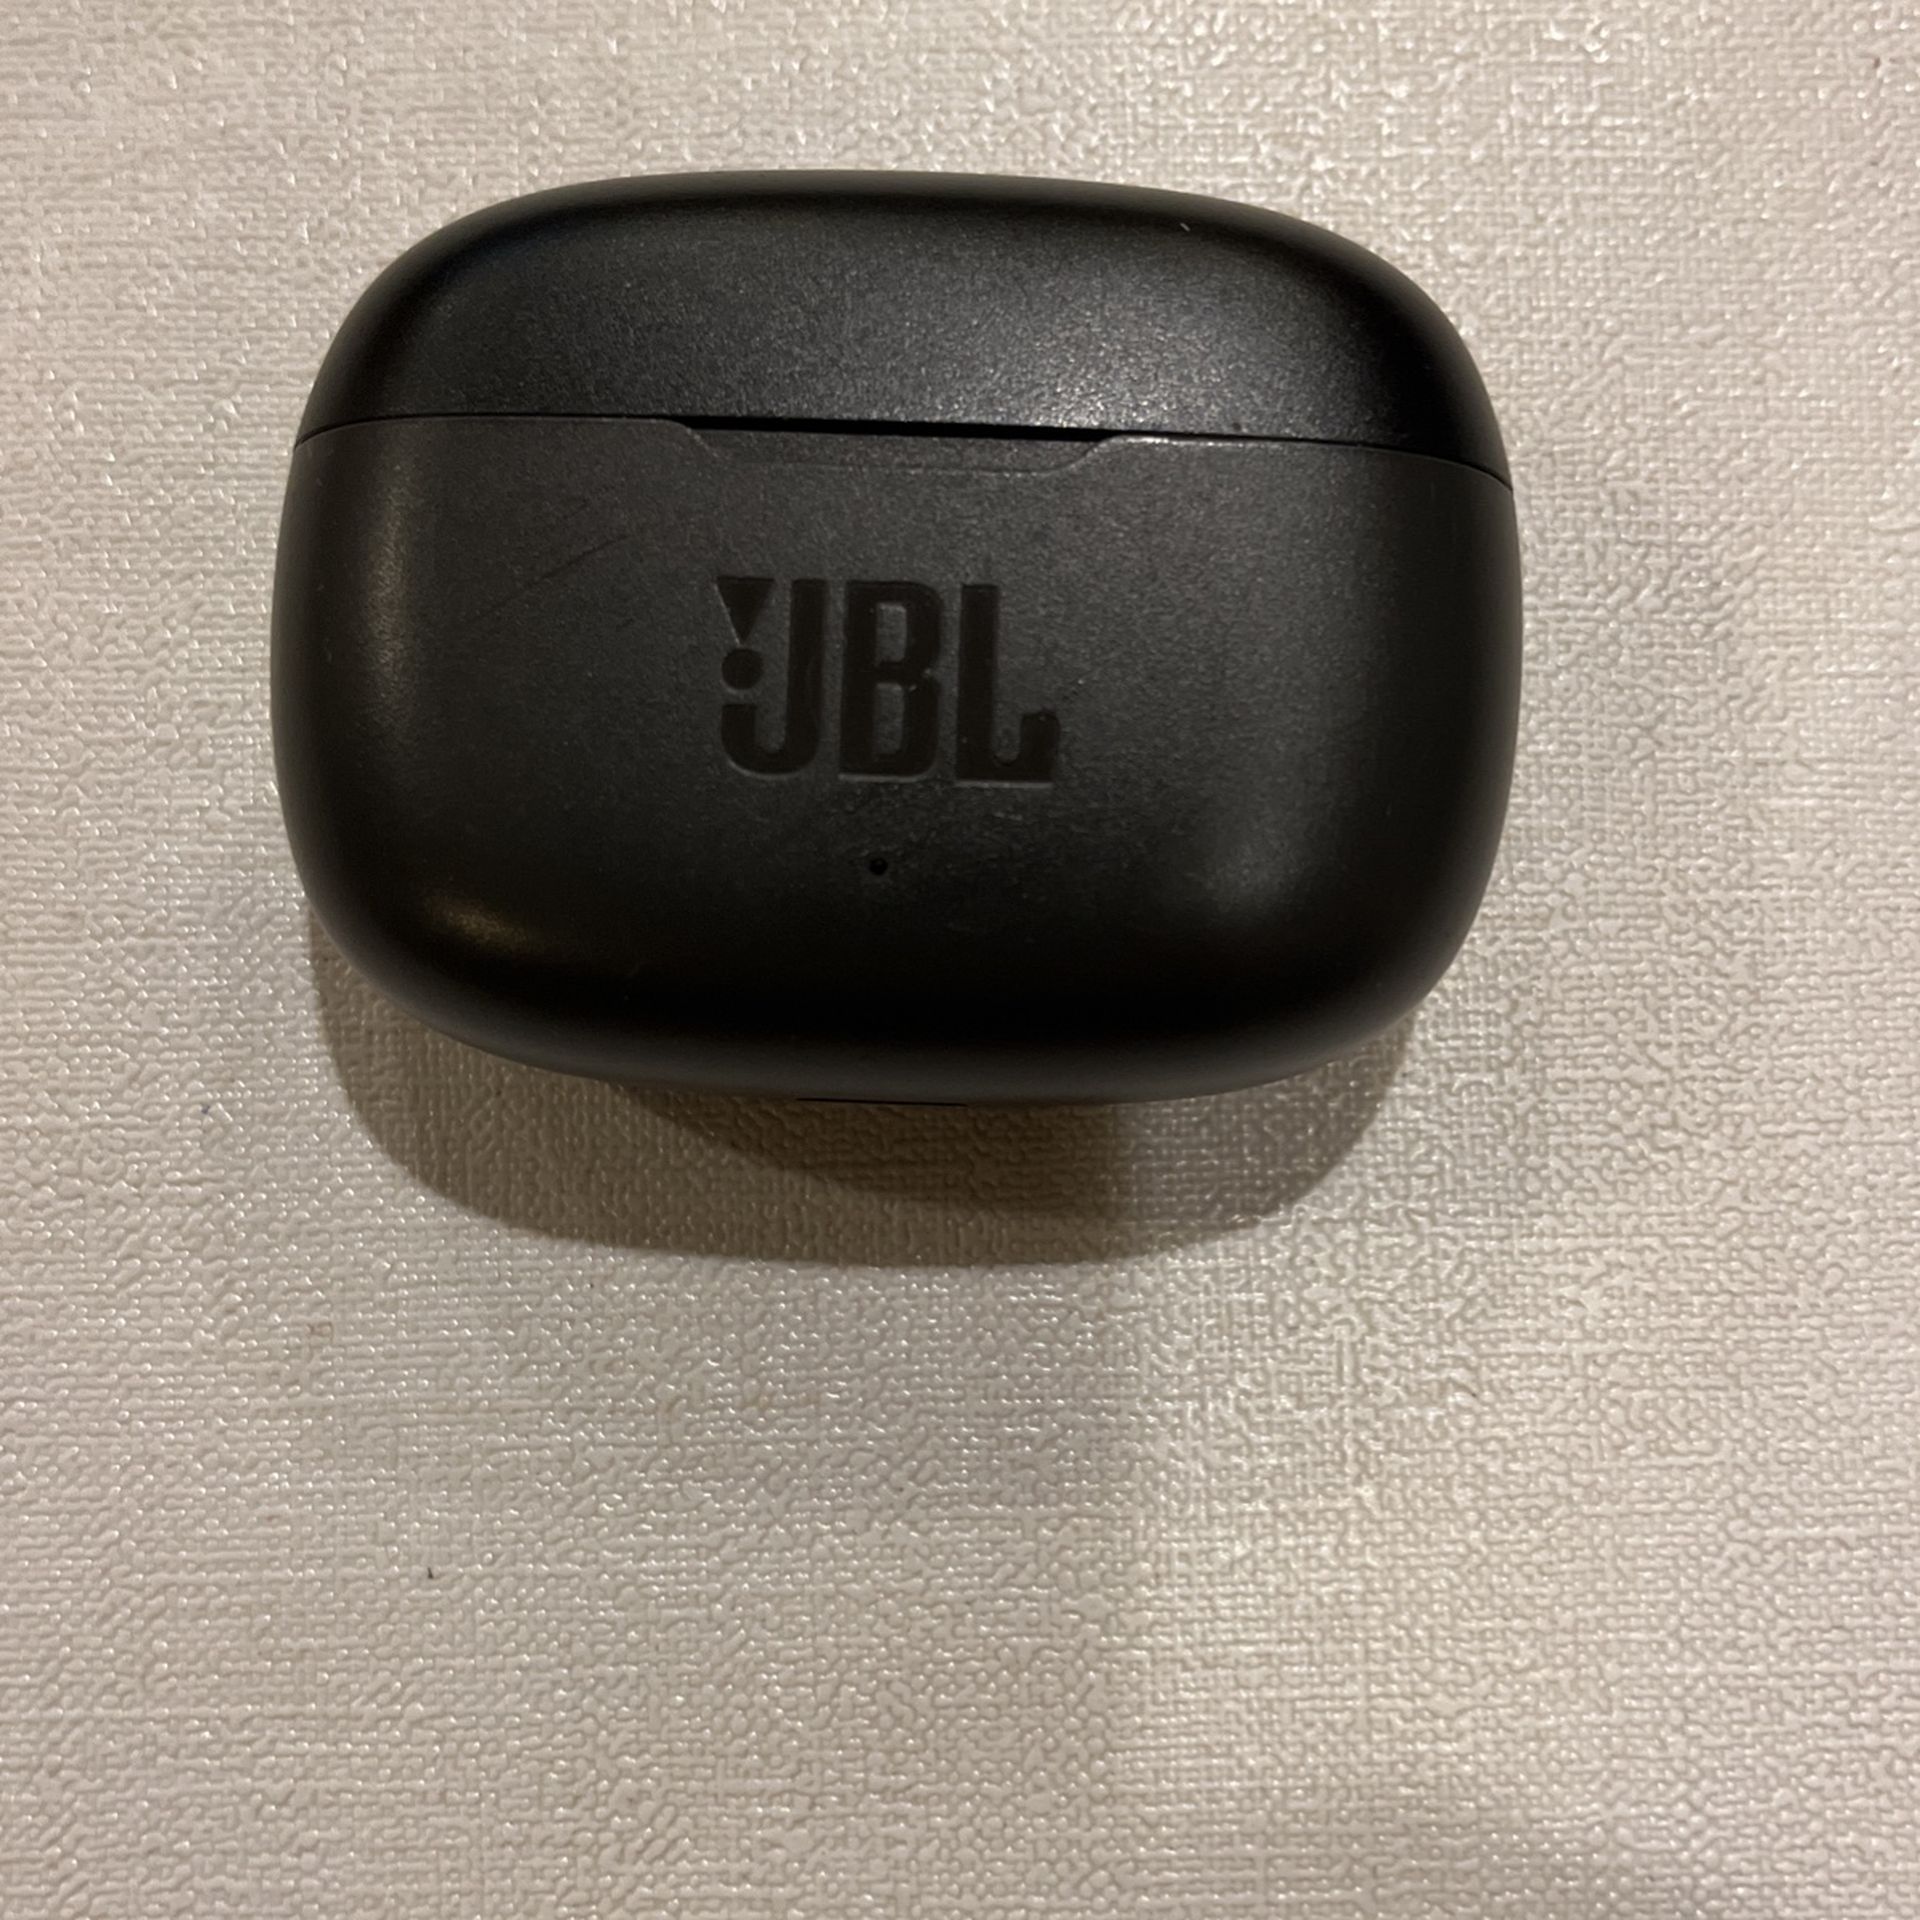 JBL wireless headphones and charger